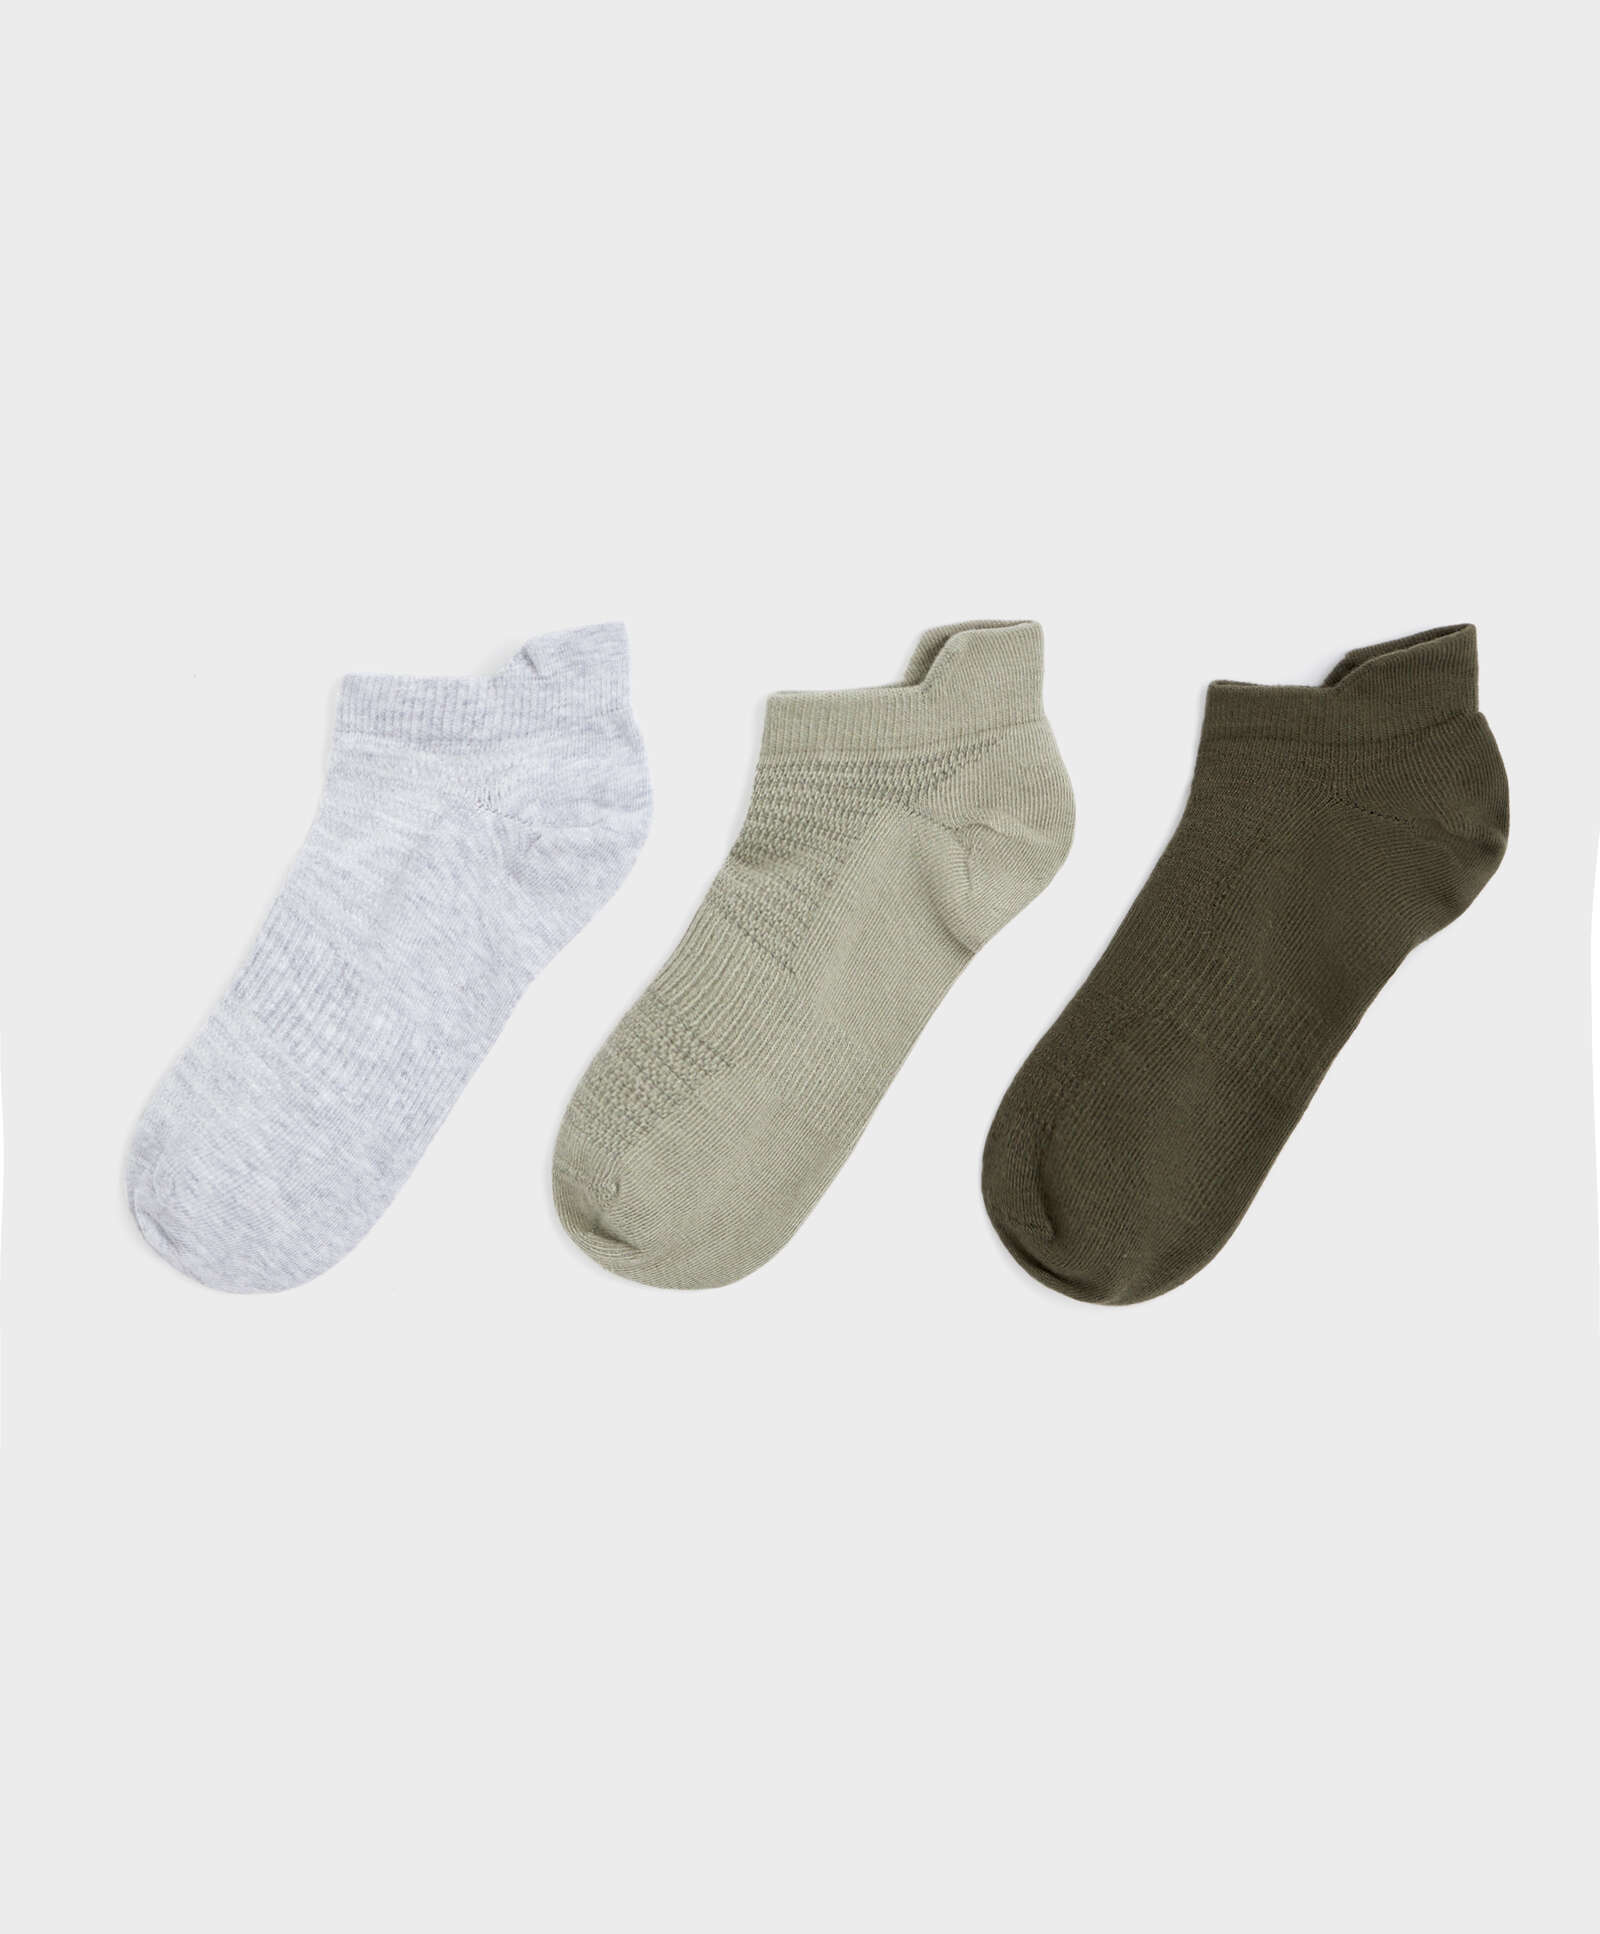 3 pairs of cotton sports trainer socks